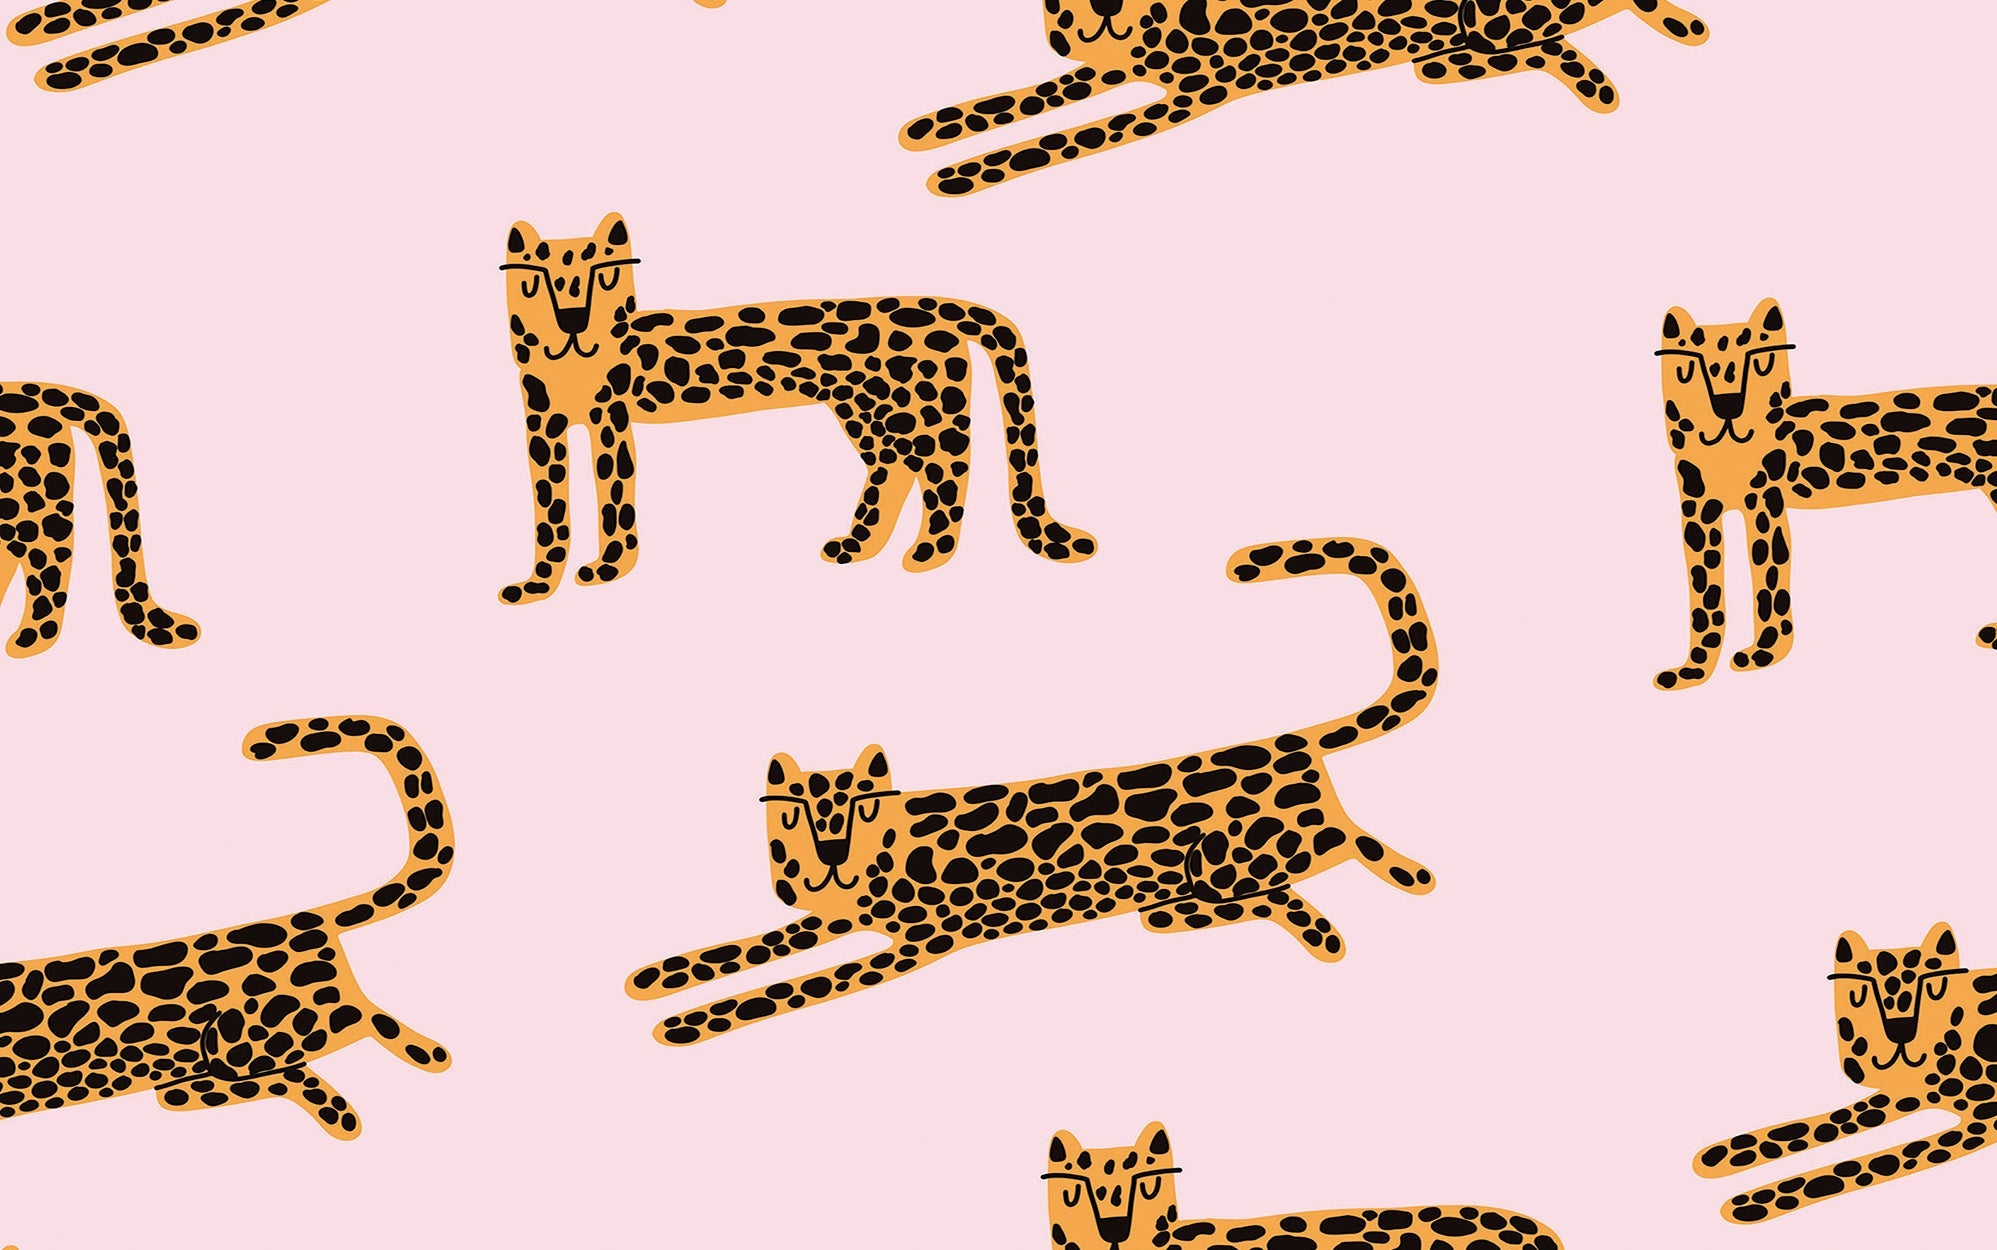 A playful and vibrant wall mural featuring a repeated pattern of stylized cheetahs on a pink background